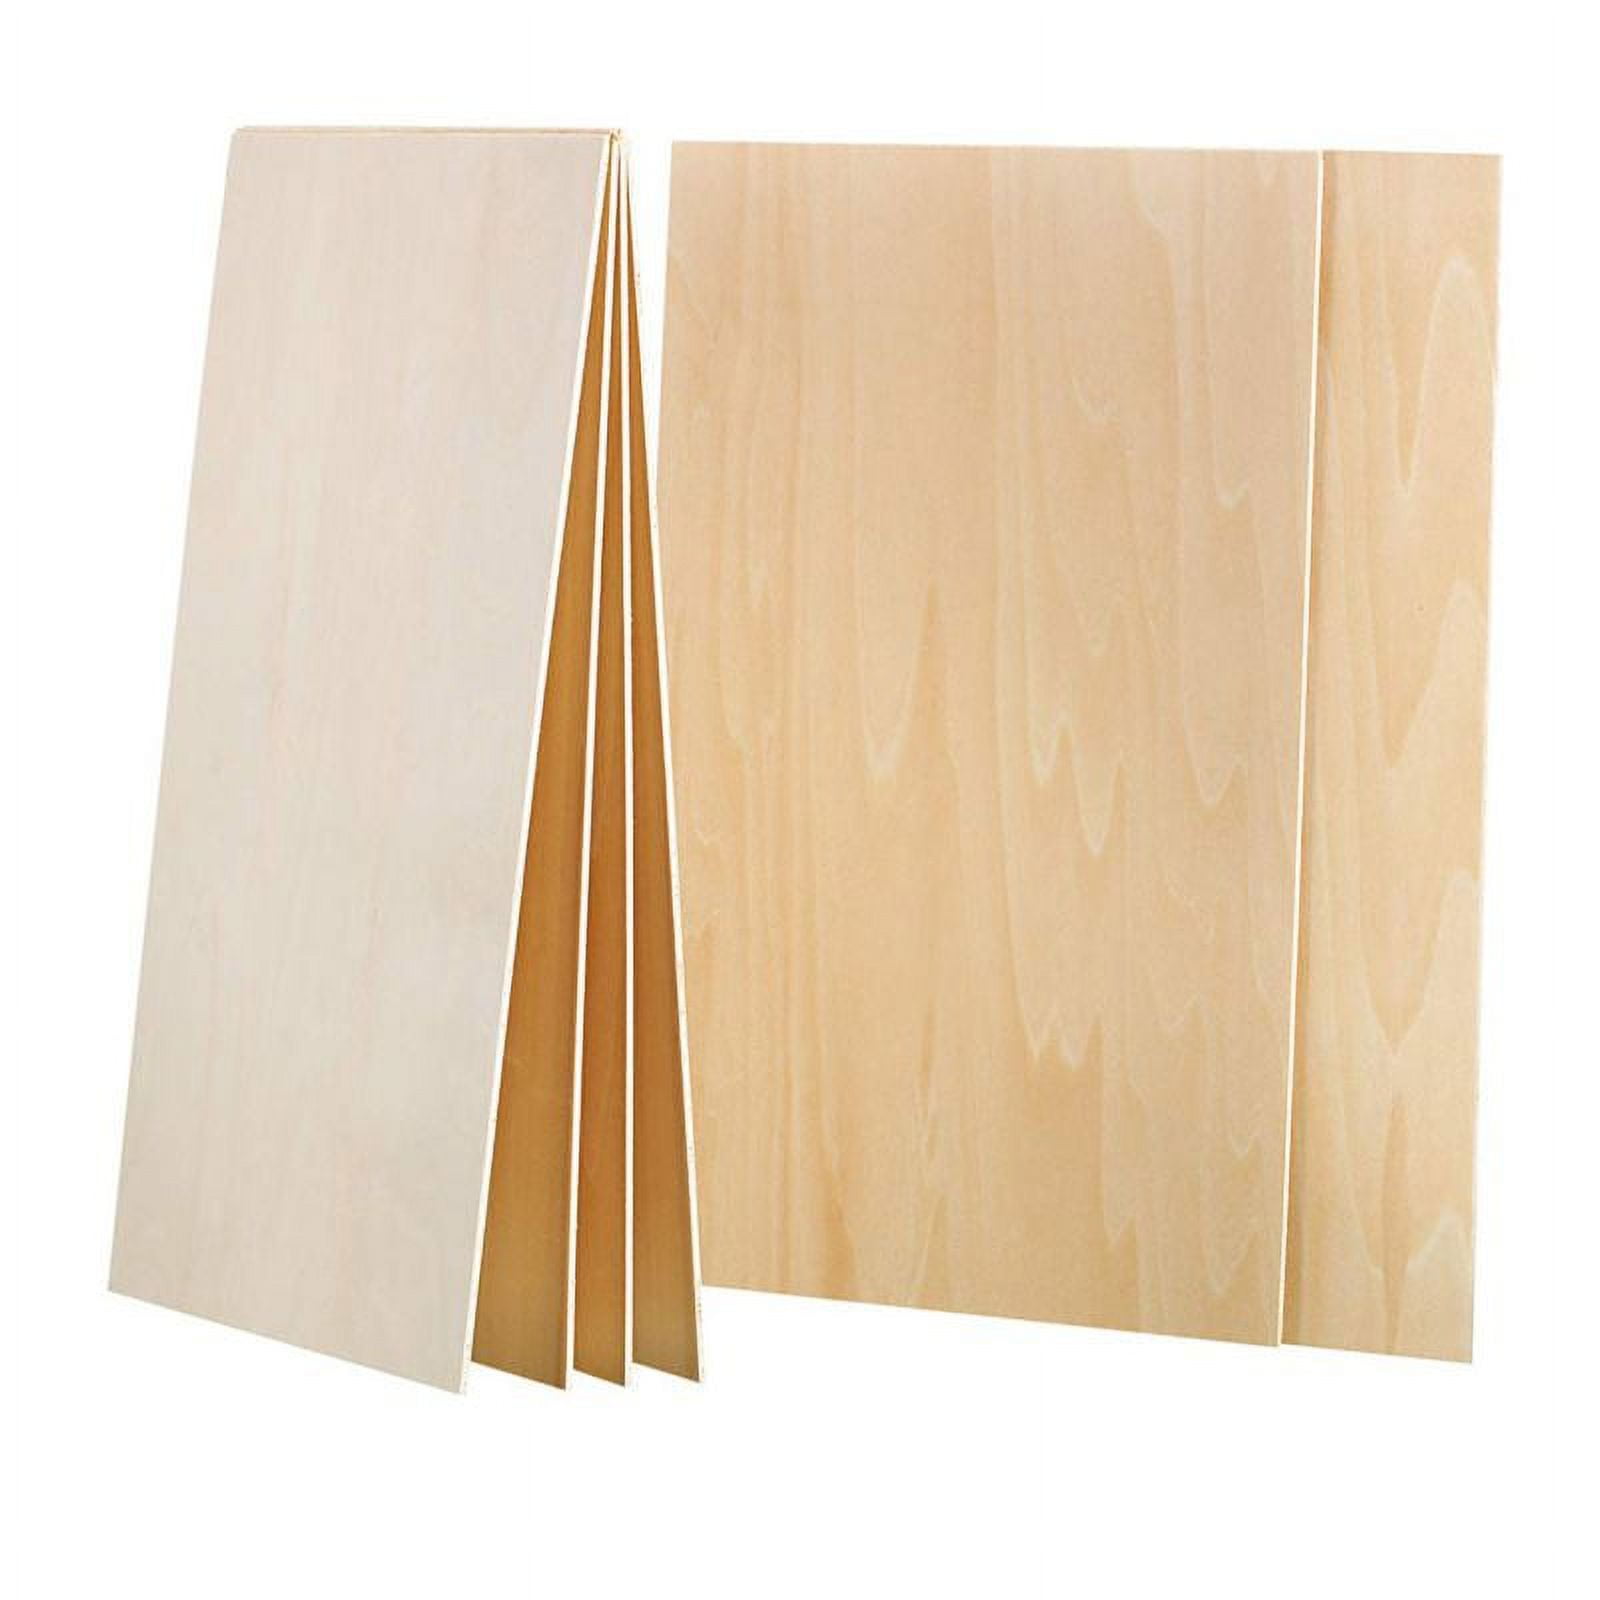 6 Pack Balsa Wood Sheets, Thin Craft Board for DIY Crafts, Model Wooden